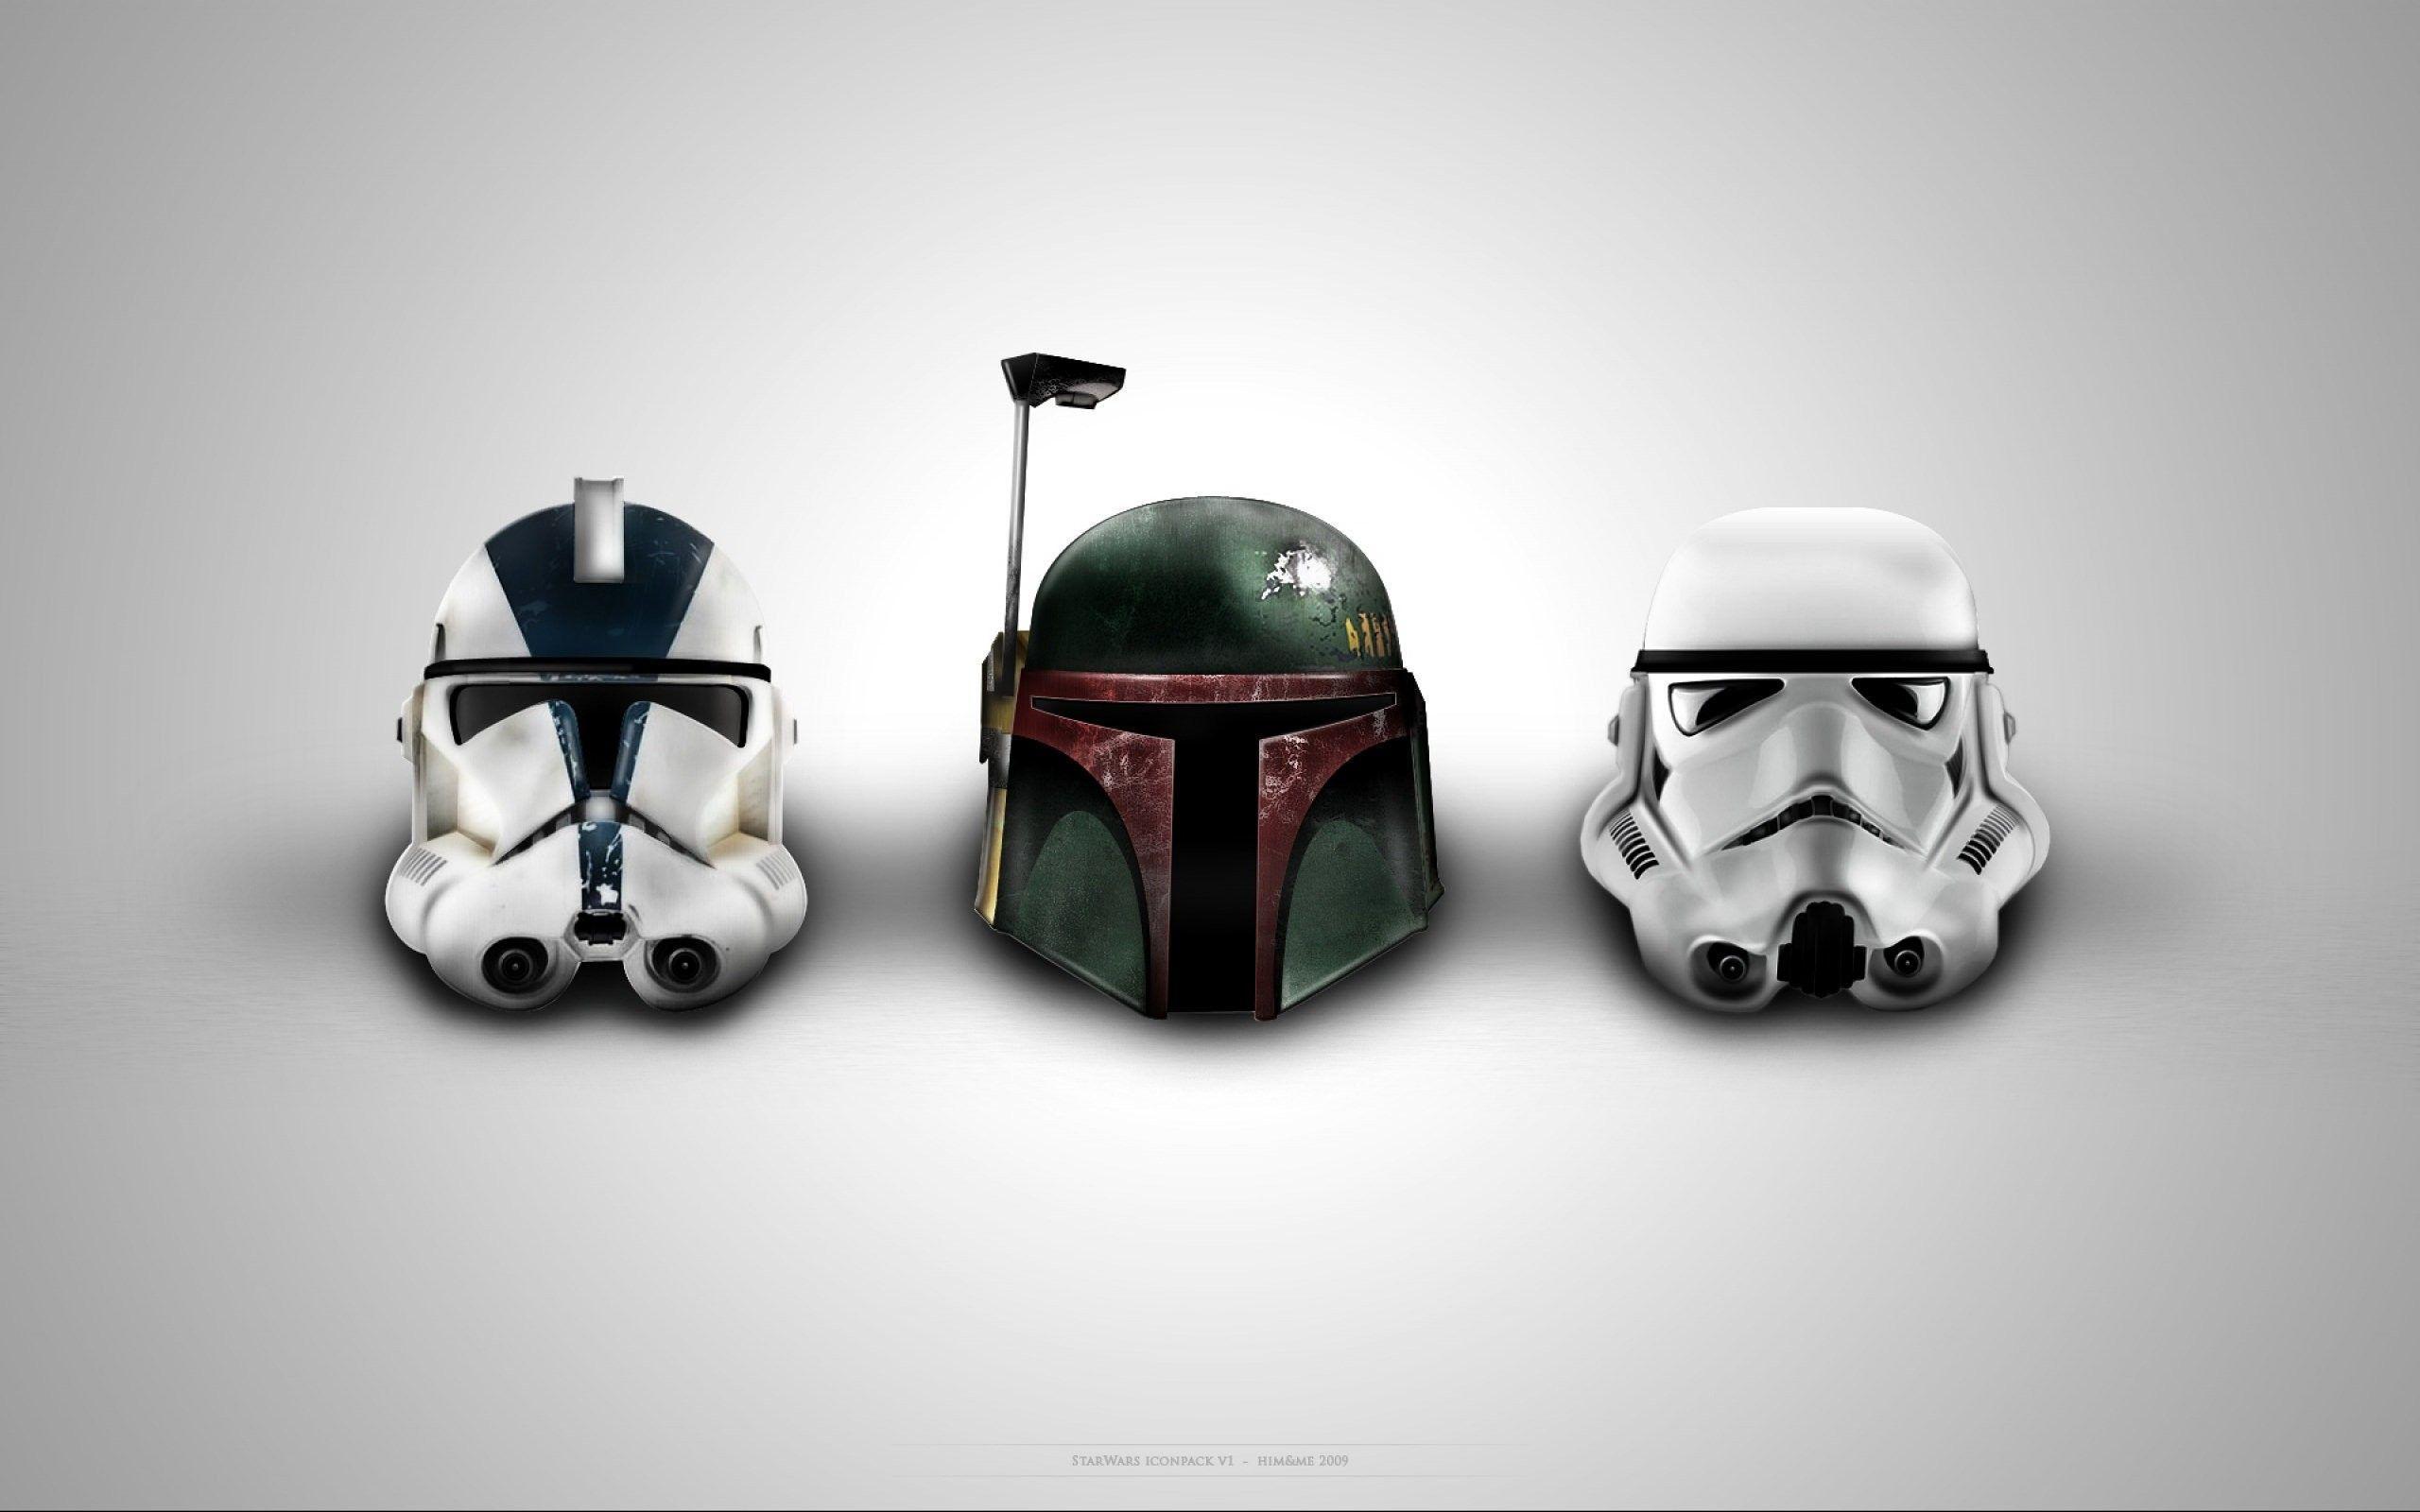 Stormtroopers Wallpaper, Stormtroopers Image 1920x1200 px